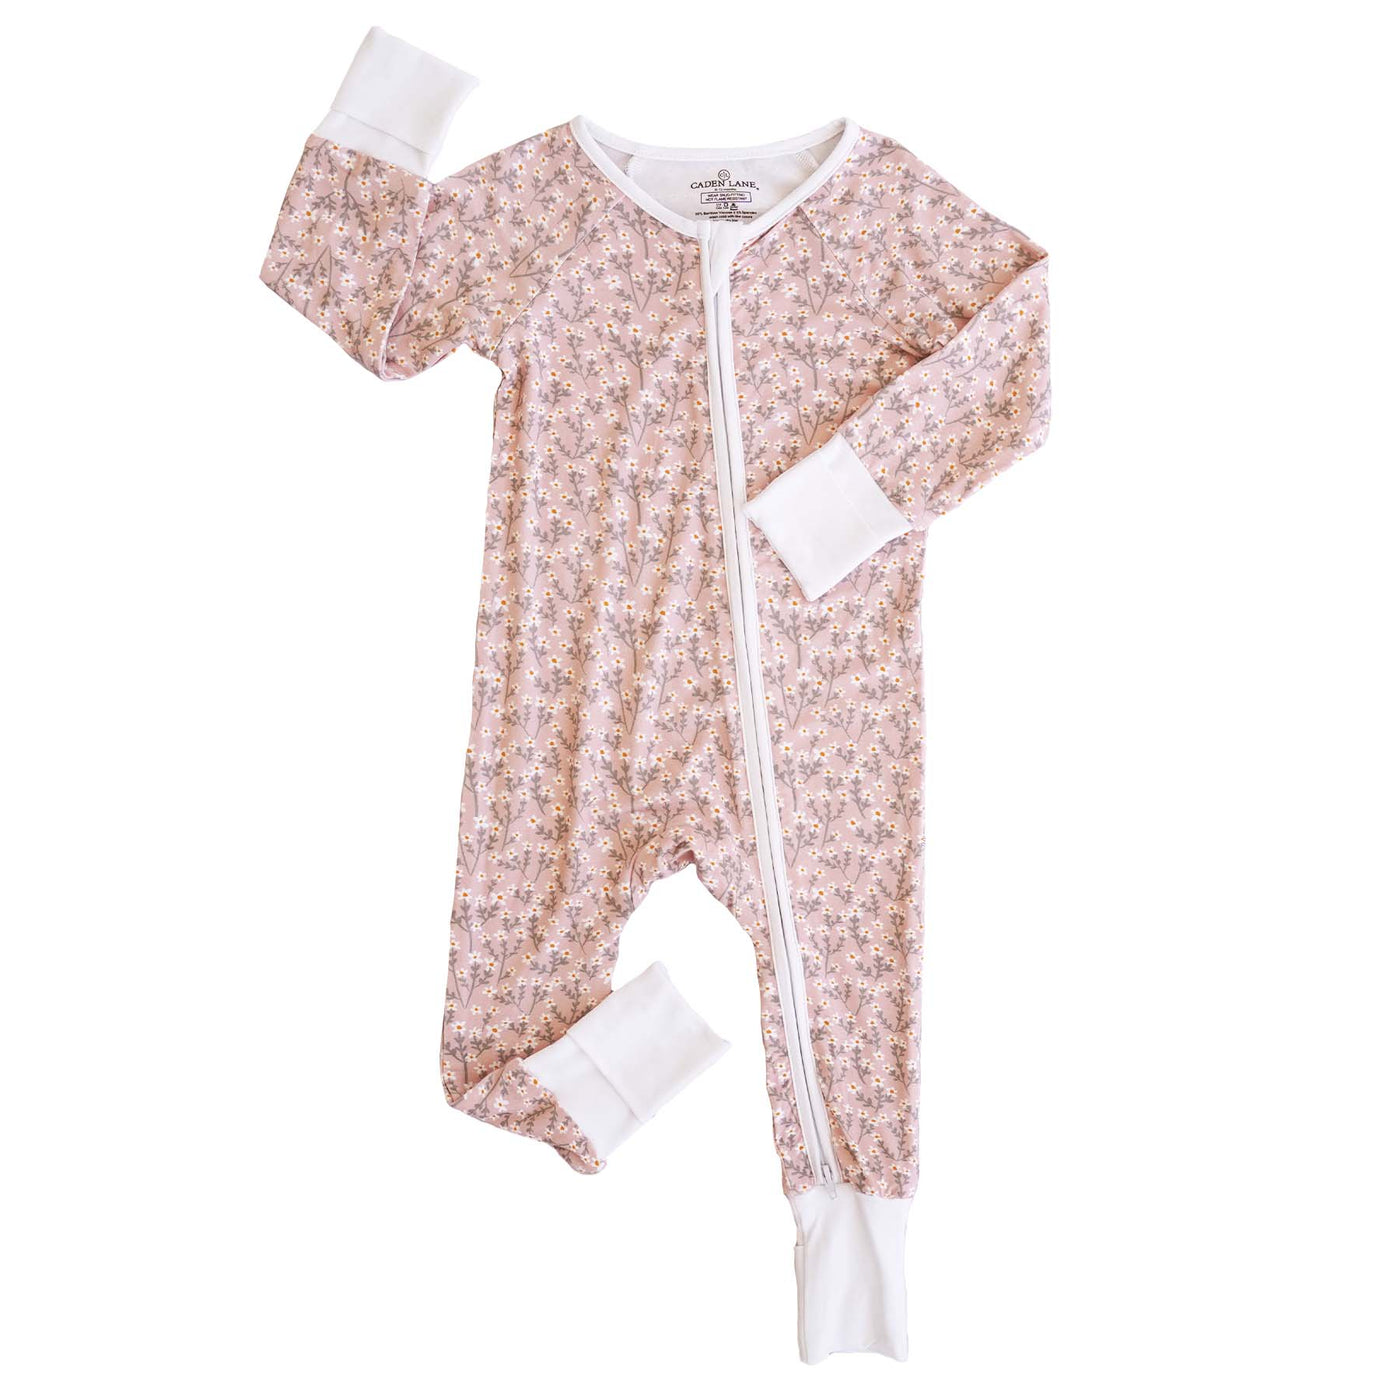 pink romper for babies with white wildflowers 